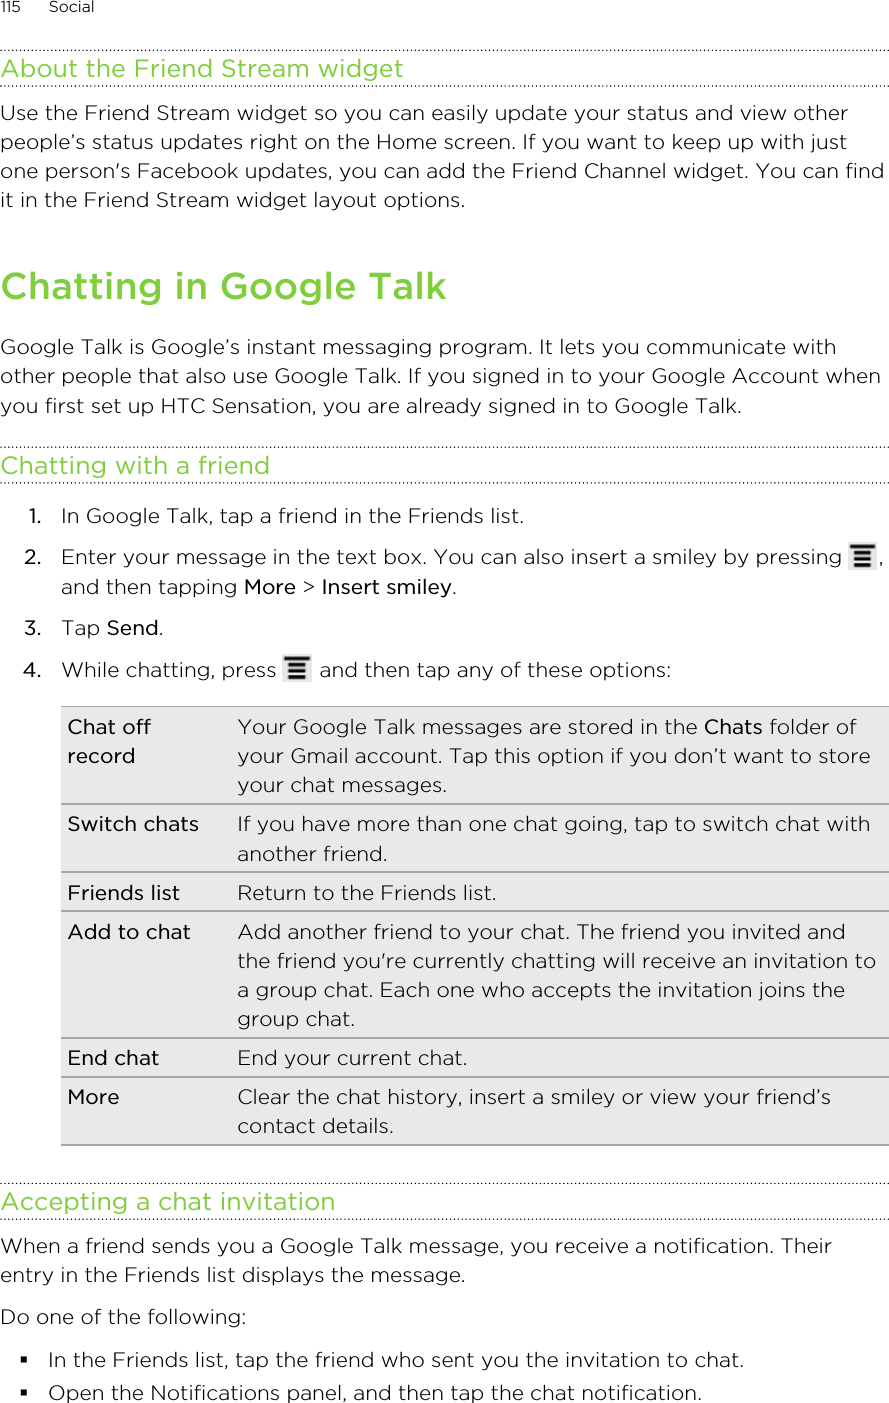 About the Friend Stream widgetUse the Friend Stream widget so you can easily update your status and view otherpeople’s status updates right on the Home screen. If you want to keep up with justone person&apos;s Facebook updates, you can add the Friend Channel widget. You can findit in the Friend Stream widget layout options.Chatting in Google TalkGoogle Talk is Google’s instant messaging program. It lets you communicate withother people that also use Google Talk. If you signed in to your Google Account whenyou first set up HTC Sensation, you are already signed in to Google Talk.Chatting with a friend1. In Google Talk, tap a friend in the Friends list.2. Enter your message in the text box. You can also insert a smiley by pressing  ,and then tapping More &gt; Insert smiley.3. Tap Send.4. While chatting, press   and then tap any of these options:Chat offrecordYour Google Talk messages are stored in the Chats folder ofyour Gmail account. Tap this option if you don’t want to storeyour chat messages.Switch chats If you have more than one chat going, tap to switch chat withanother friend.Friends list Return to the Friends list.Add to chat Add another friend to your chat. The friend you invited andthe friend you&apos;re currently chatting will receive an invitation toa group chat. Each one who accepts the invitation joins thegroup chat.End chat End your current chat.More Clear the chat history, insert a smiley or view your friend’scontact details.Accepting a chat invitationWhen a friend sends you a Google Talk message, you receive a notification. Theirentry in the Friends list displays the message.Do one of the following:§In the Friends list, tap the friend who sent you the invitation to chat.§Open the Notifications panel, and then tap the chat notification.115 Social